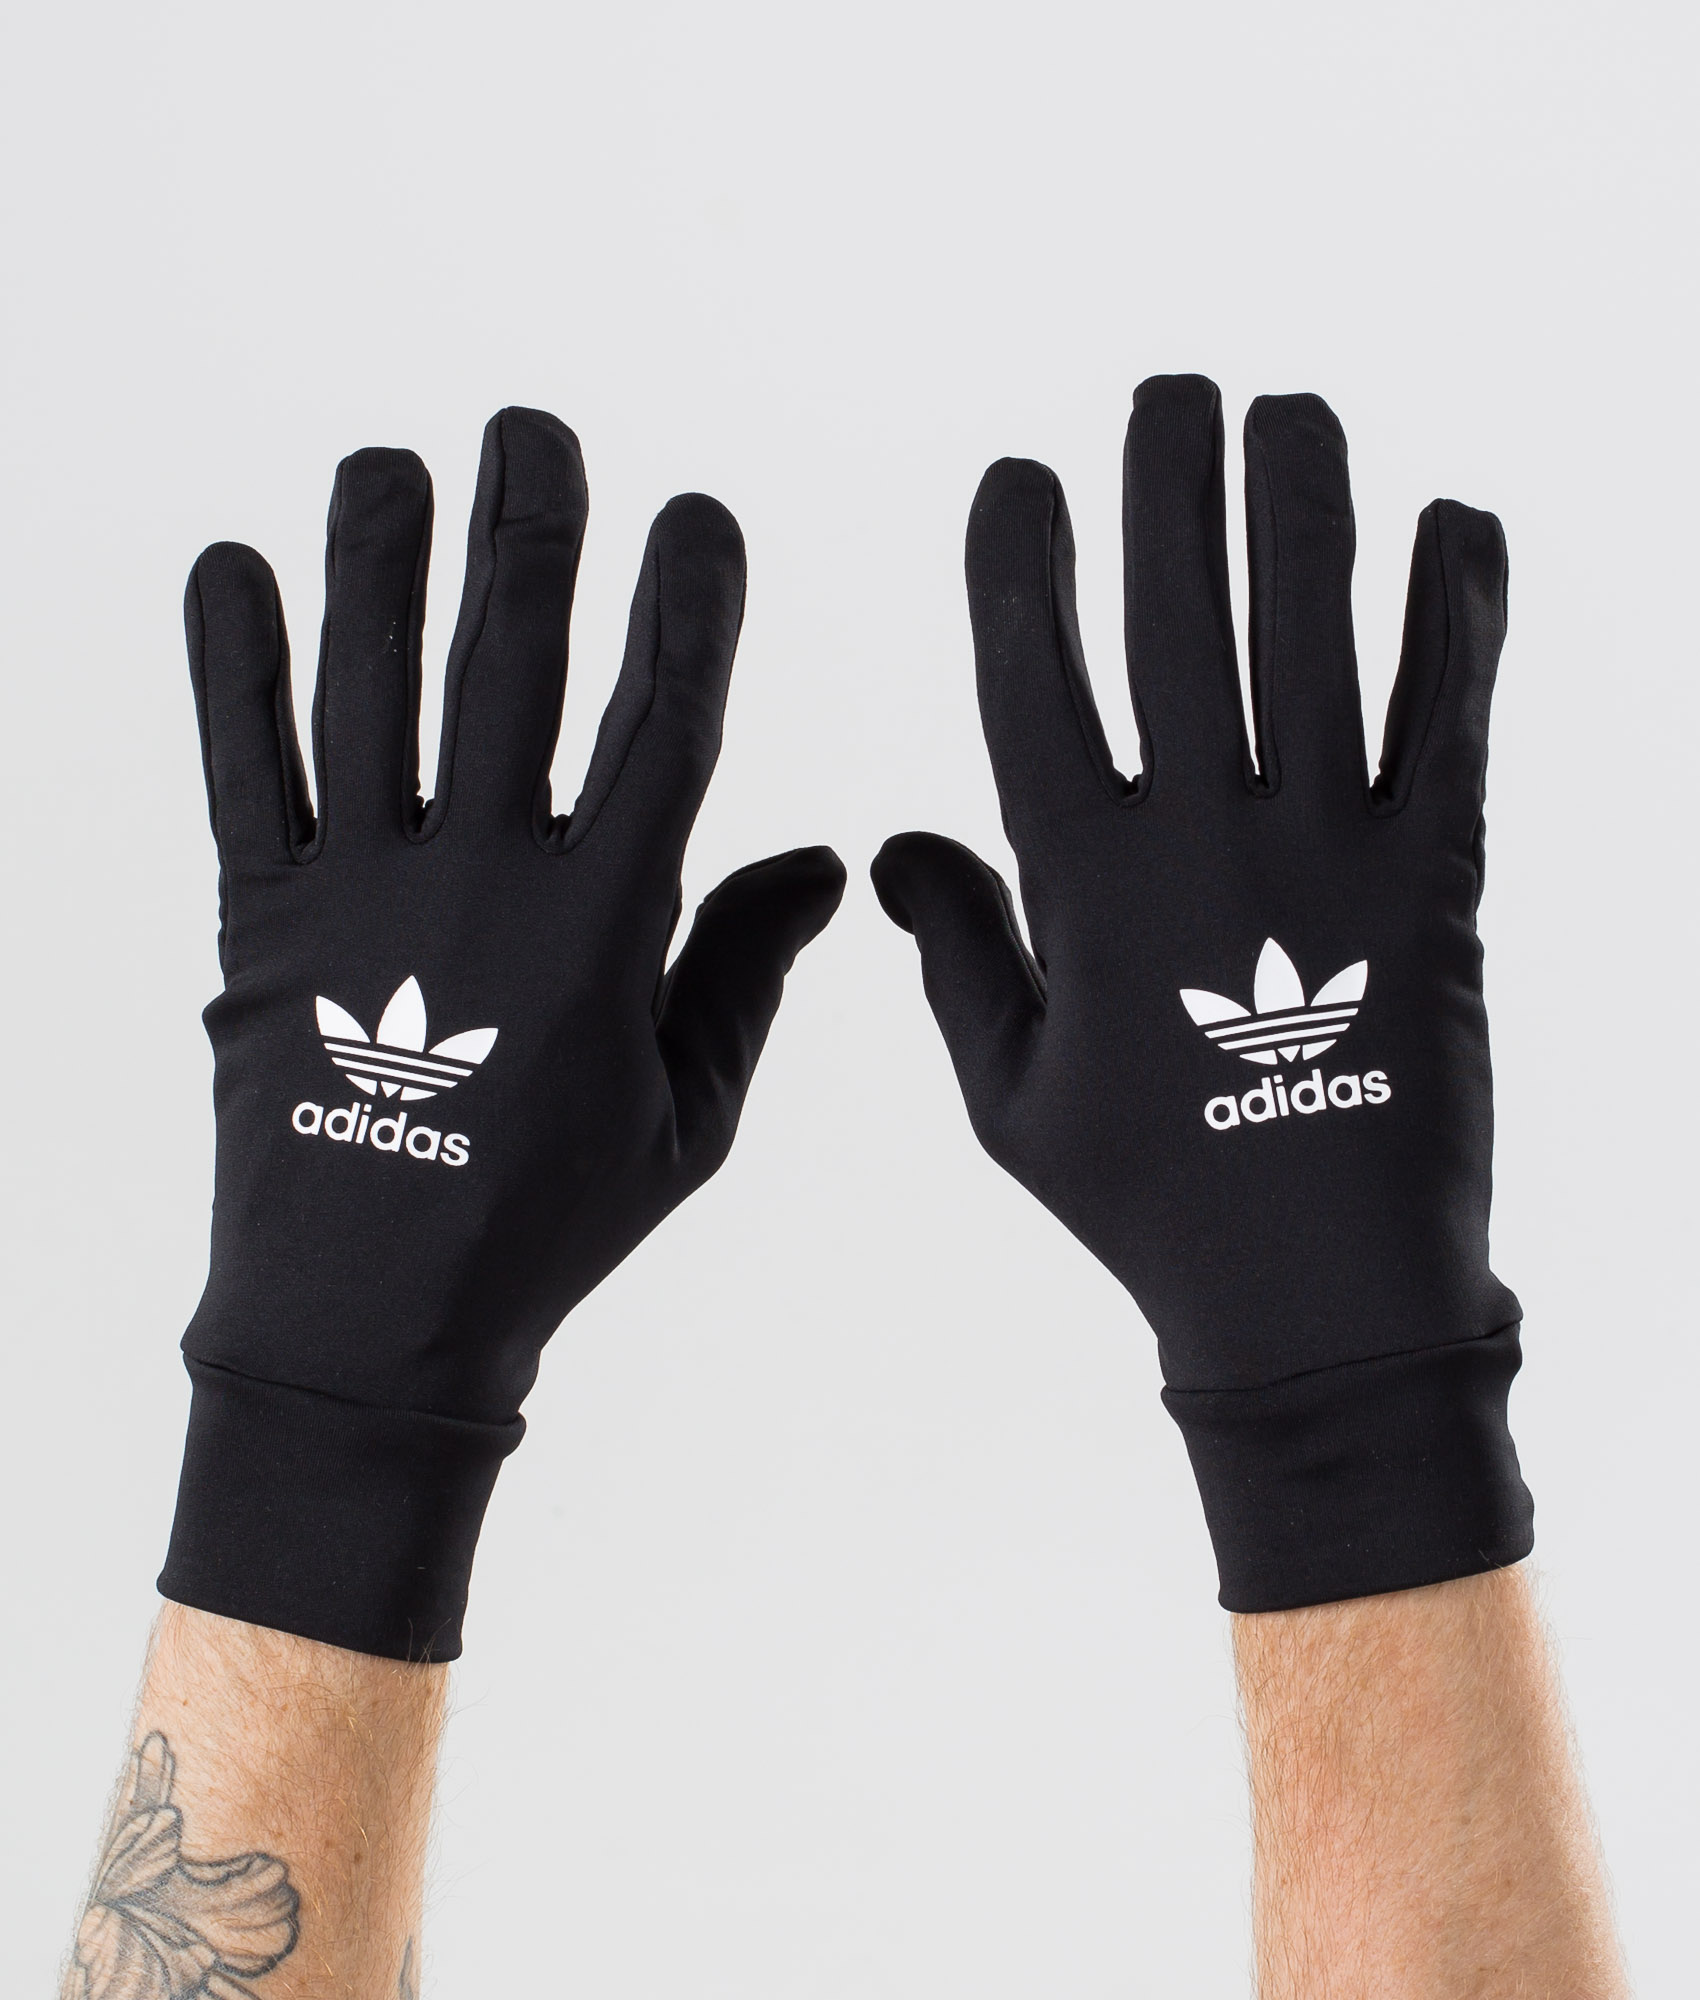 adidas gloves for winter